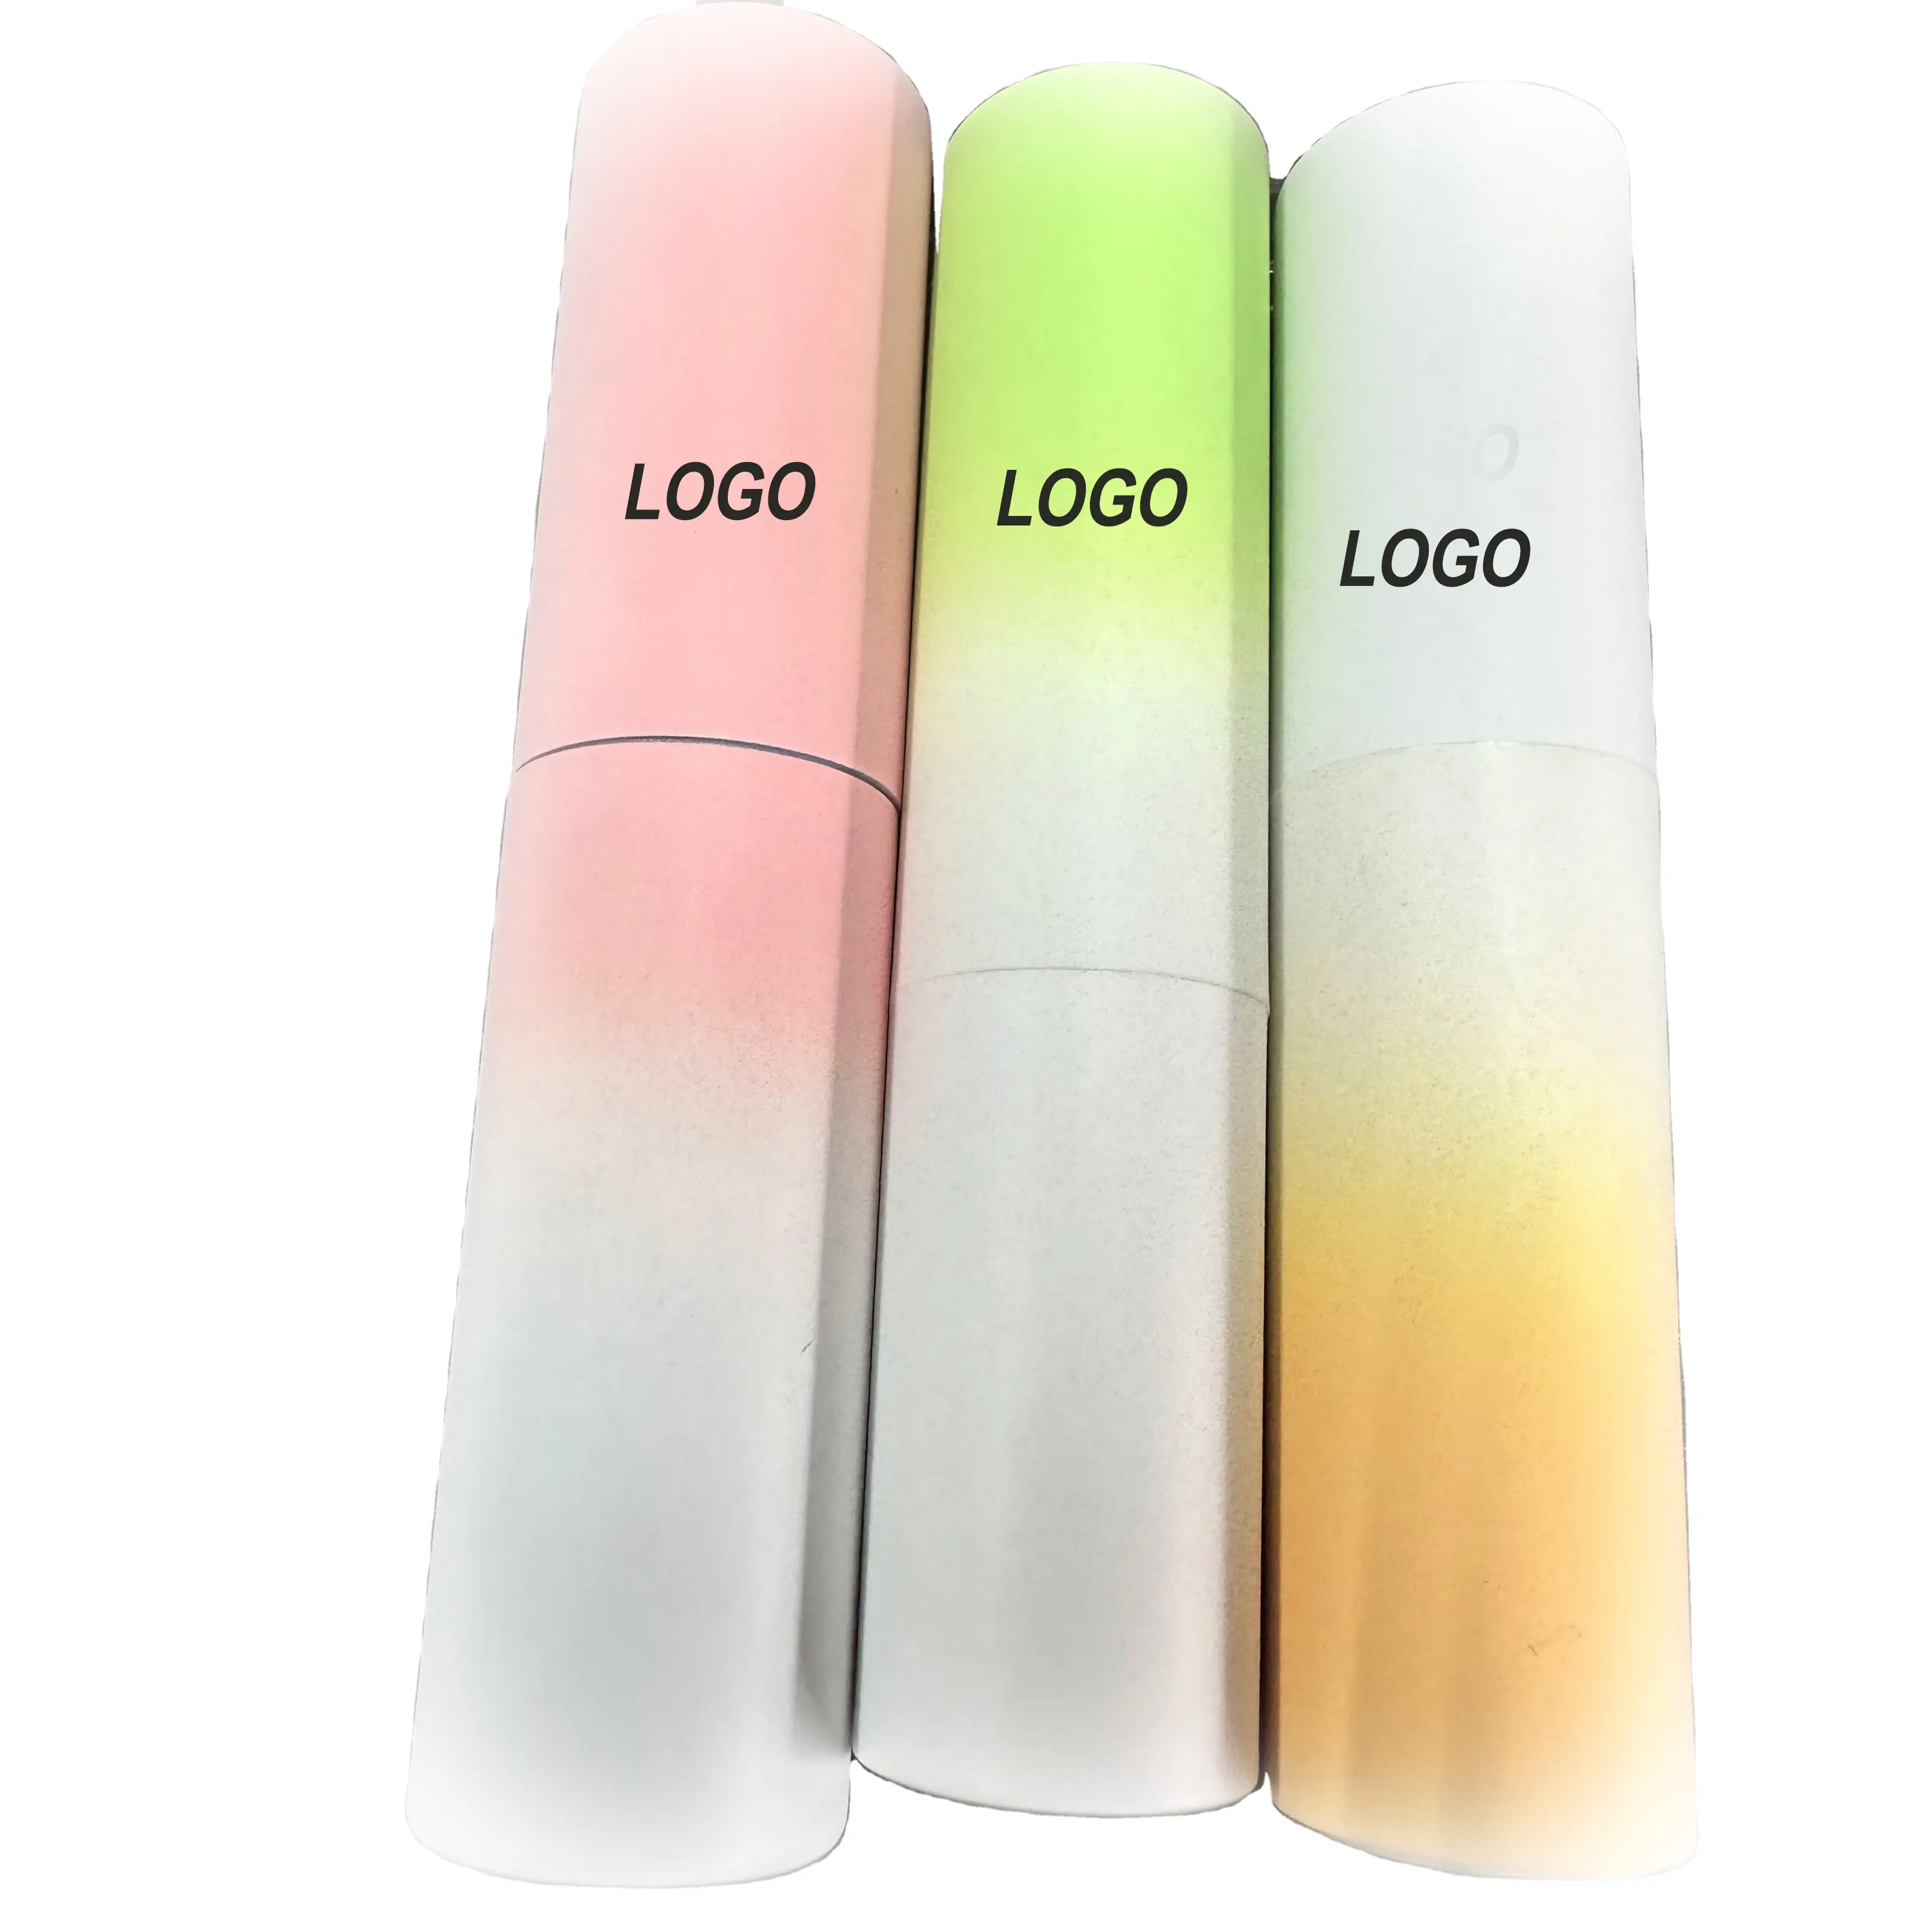 herb 0 Alcohol Mint Flavor 9ml Portable Oral Refreshing Mouth Spray Reduce Odor Breath Fresheners Custom Logo Natural Wholesale